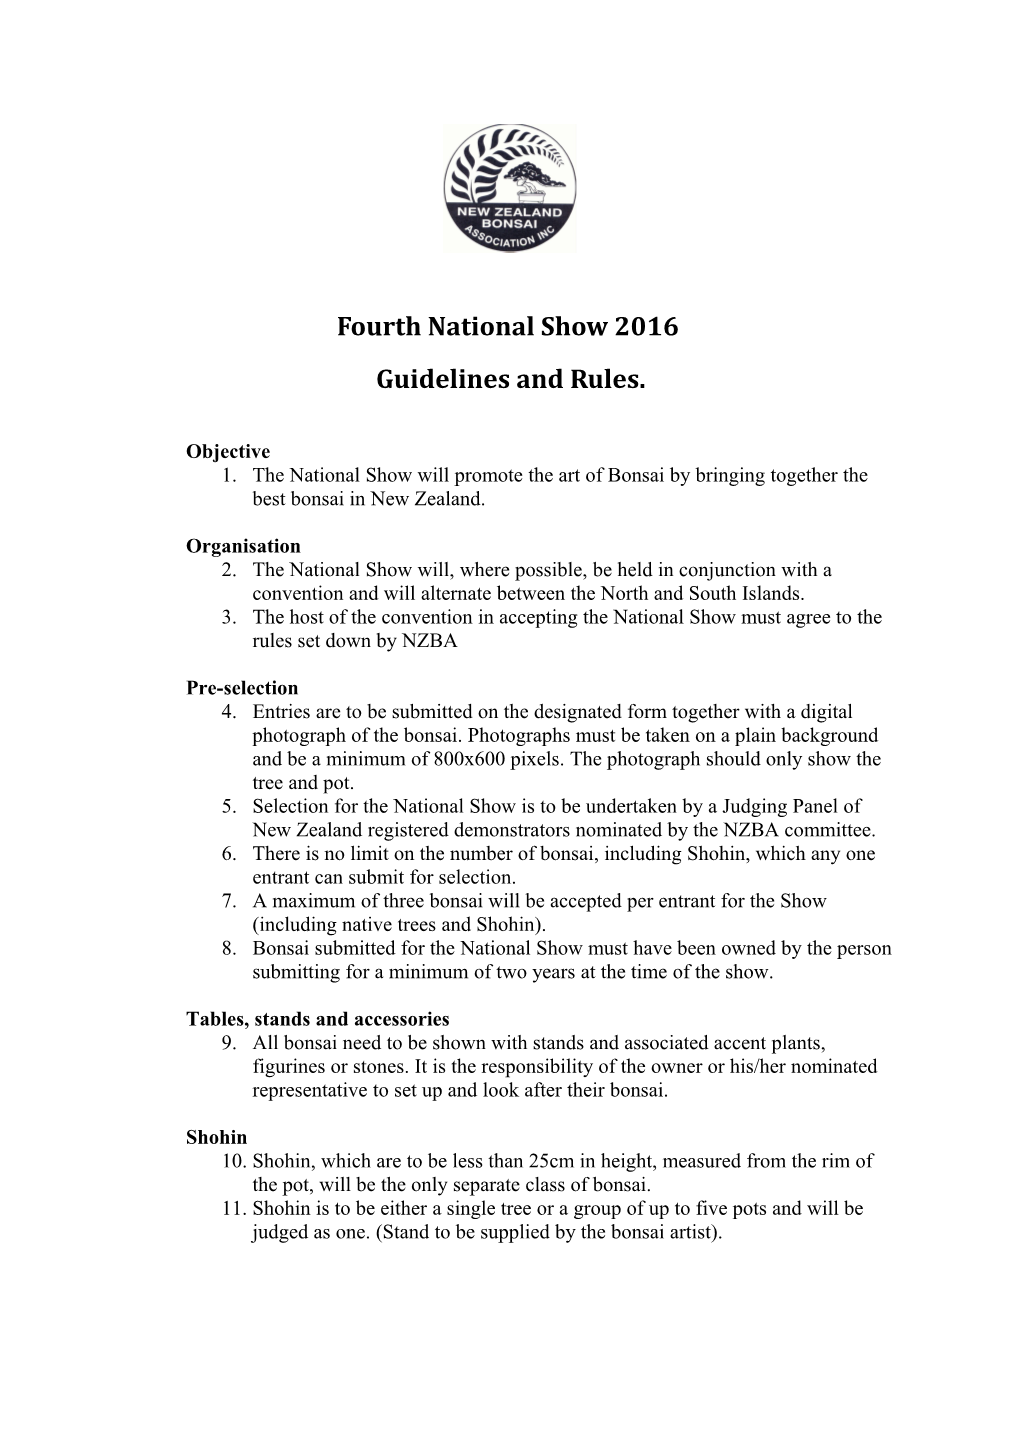 NZBA 1St National Show 2009 Guidelines and Rules